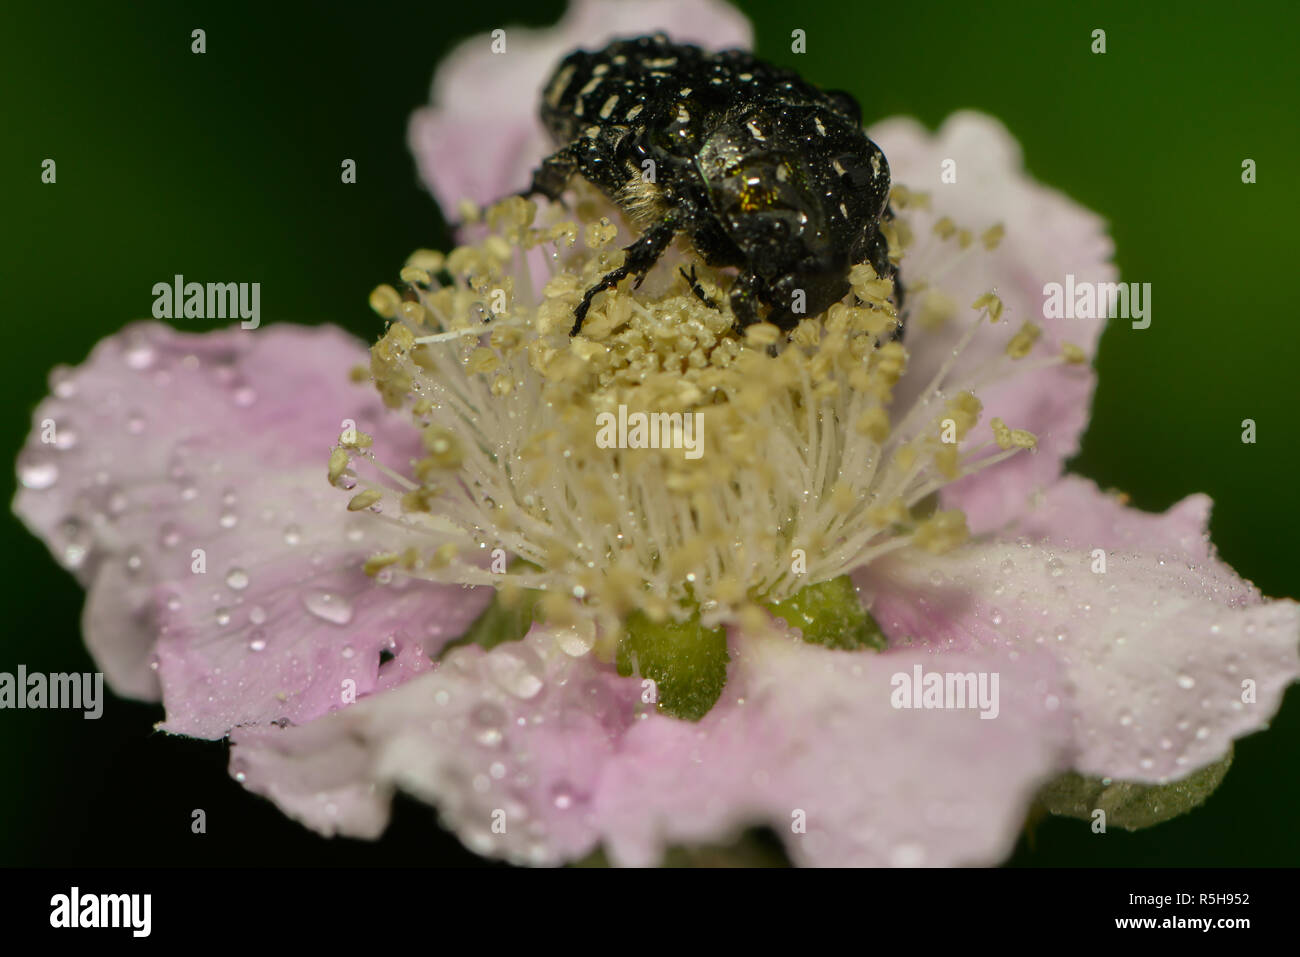 mourning rose beetle sits on a hedge-rose blossom Stock Photo